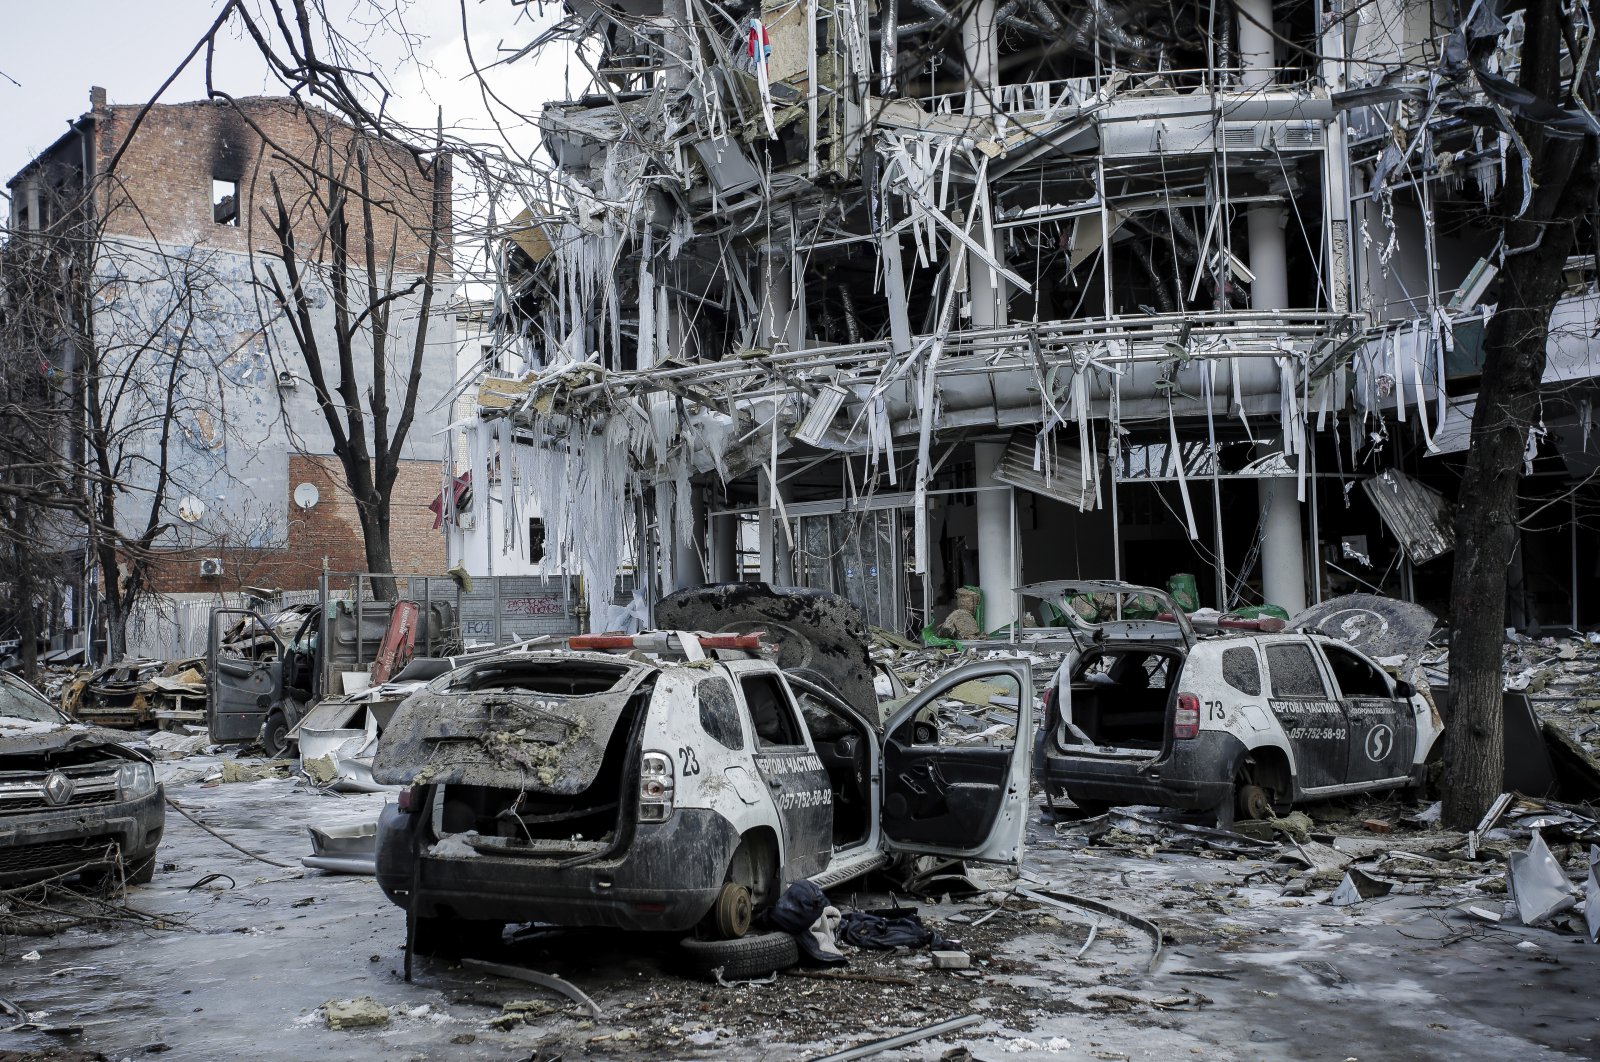 Damaged vehicles and buildings in Kharkiv&#039;s city center in Ukraine, March 16, 2022. (AP Photo)